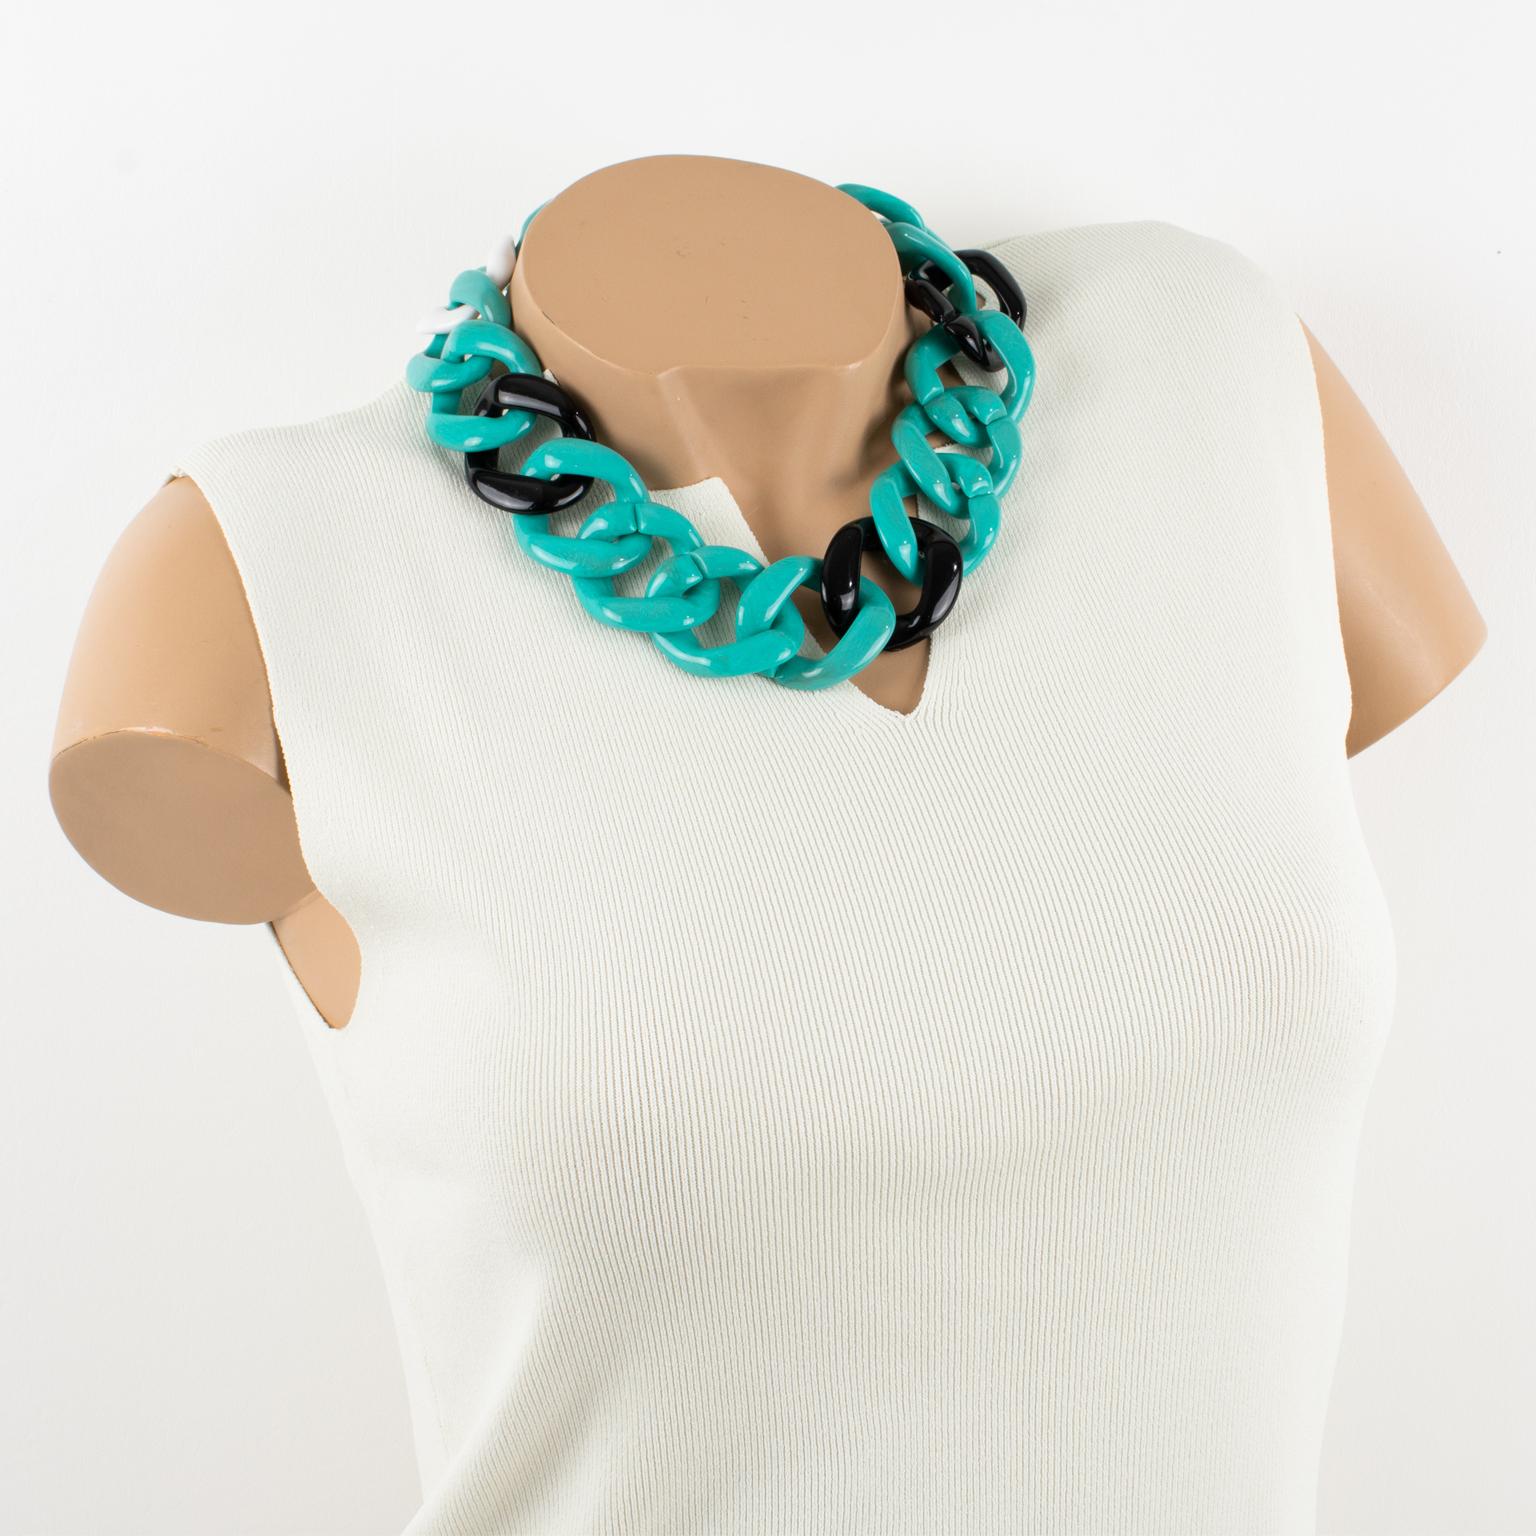 This adorable Angela Caputi, made-in-It Italy choker necklace features an extra-large flat resin chain design in turquoise-blue color with a black and white contrast. Her matching of colors is always bold and classy.
As you know, Caputi jewelry is